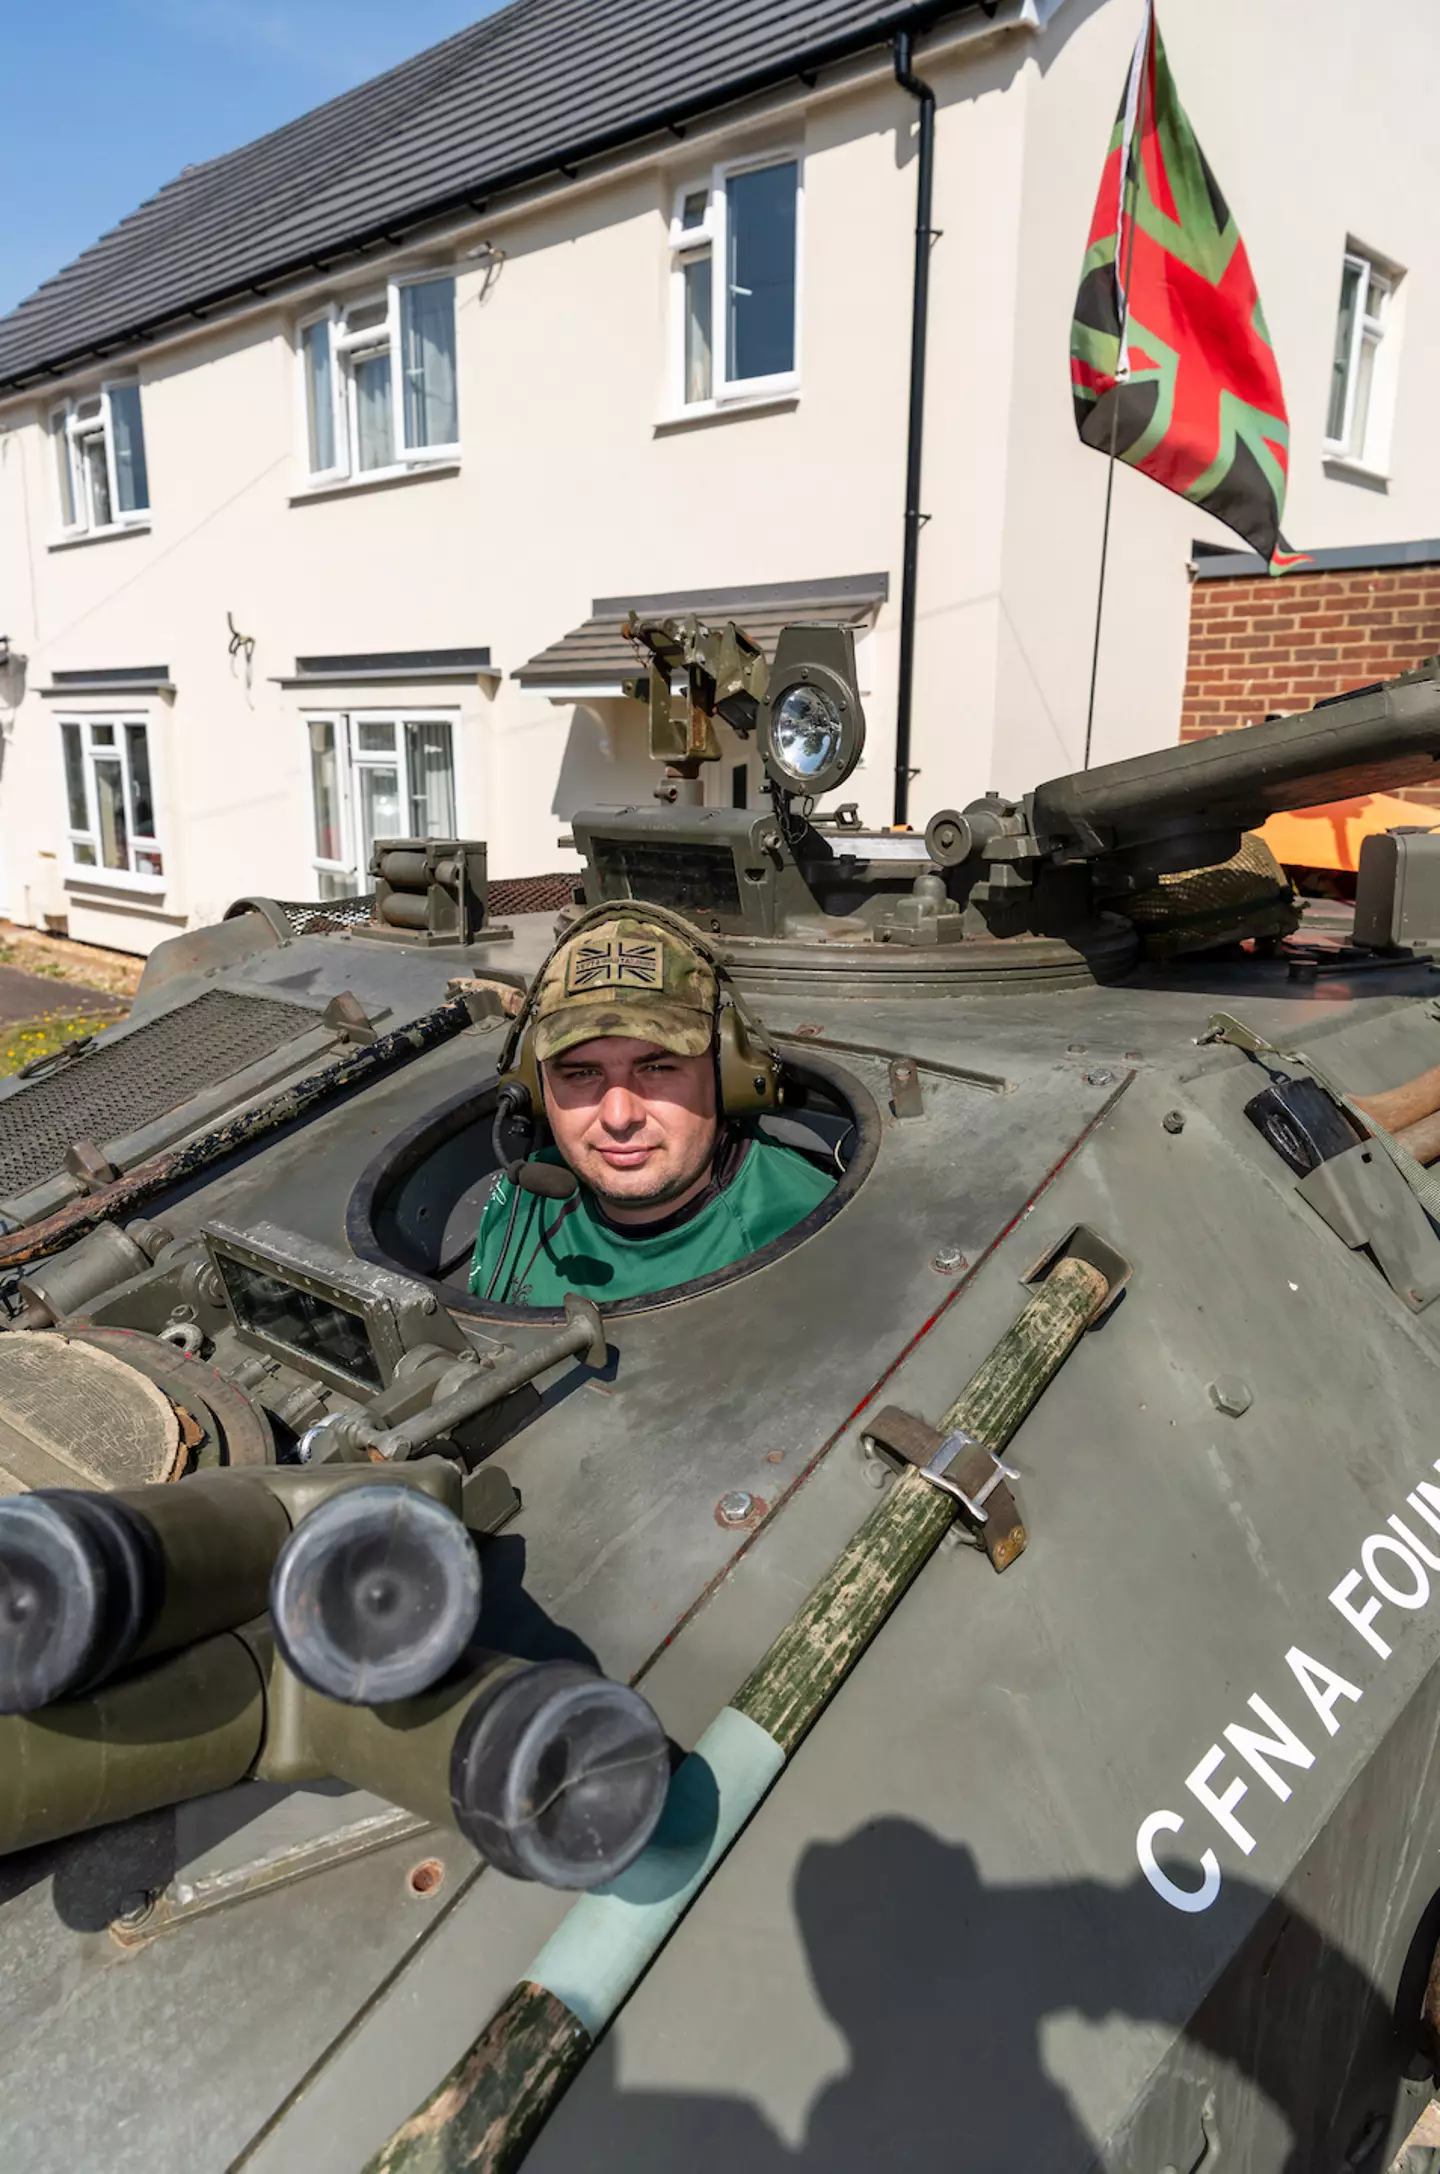 Gary Freeland with his £20,000 tank.